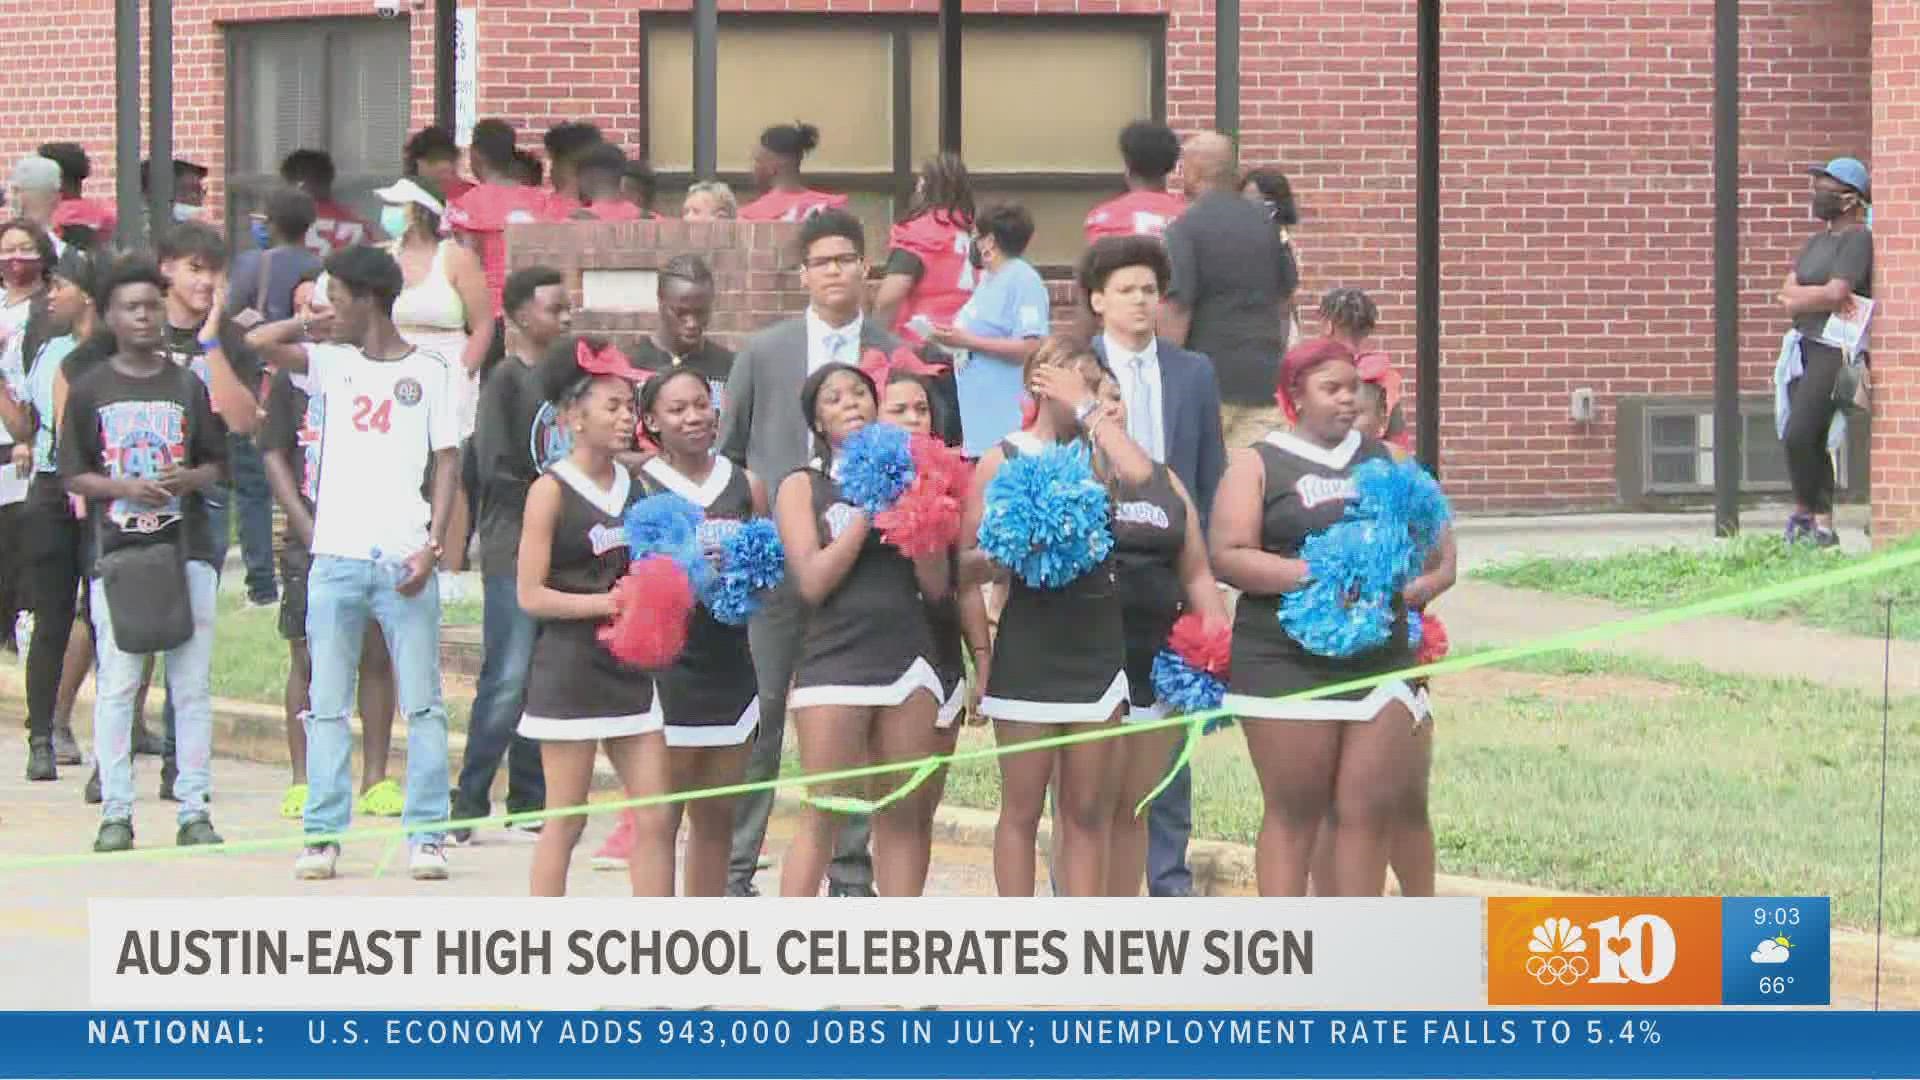 Austin-East High School held a ceremony to celebrate its new electronic sign